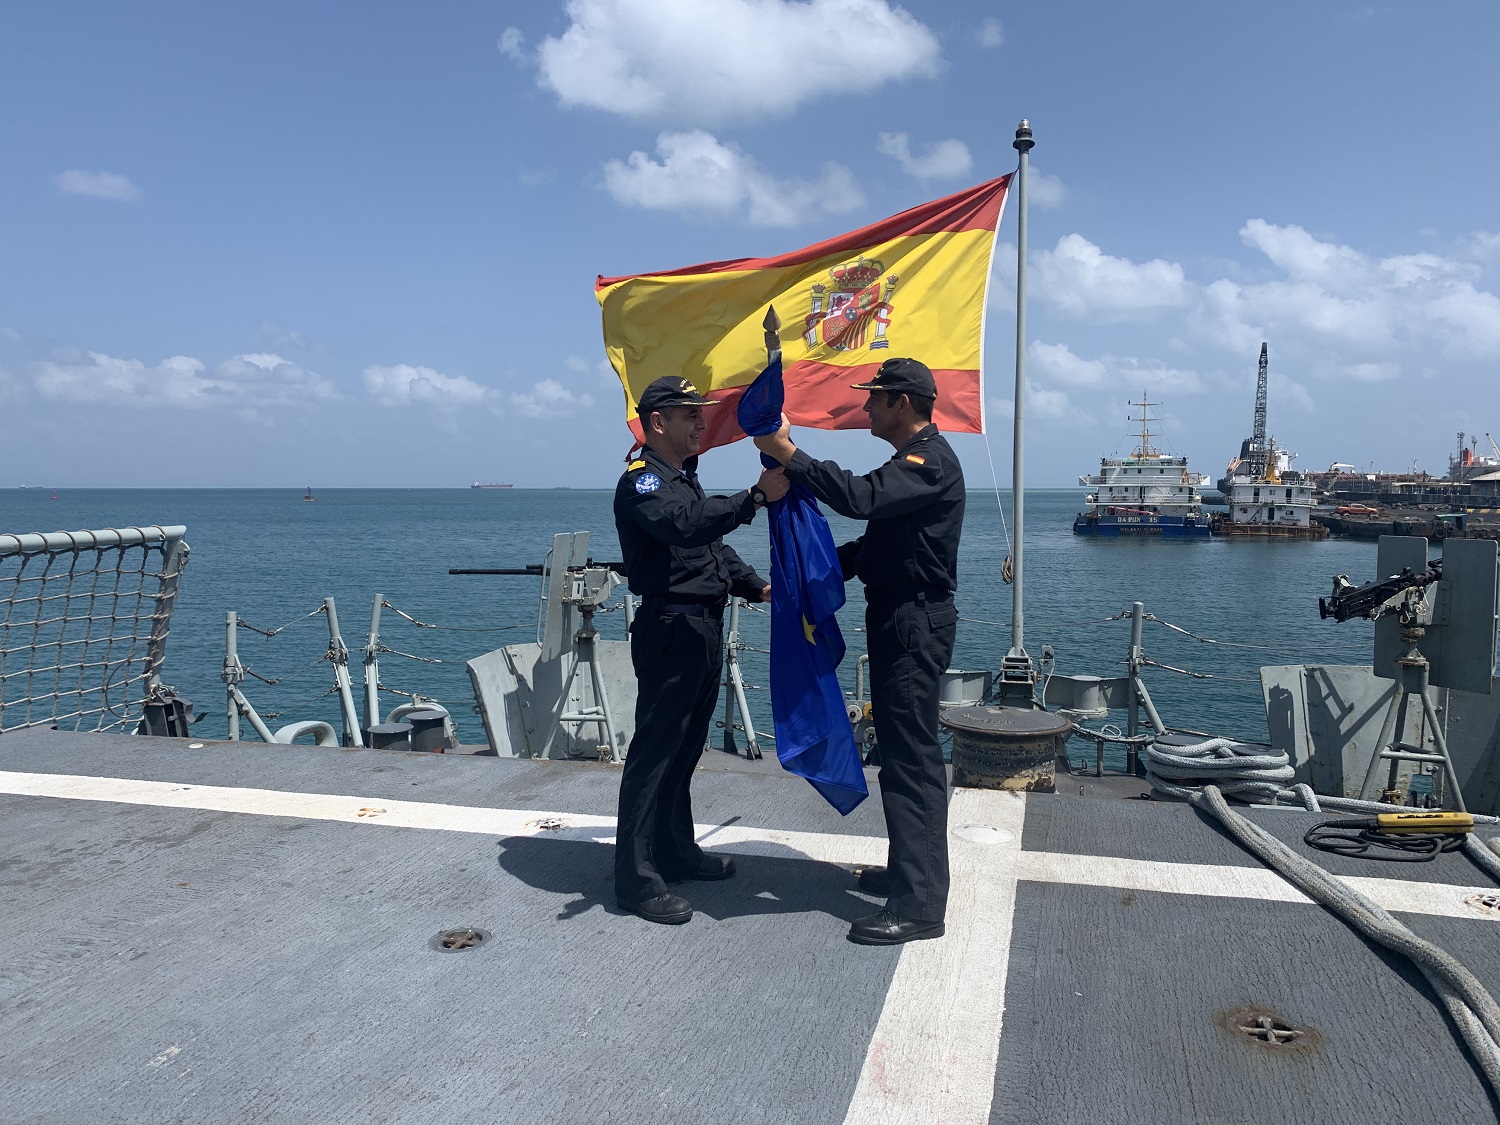 The frigate 'Numancia' takes over from 'Victoria' in Operation Atalanta